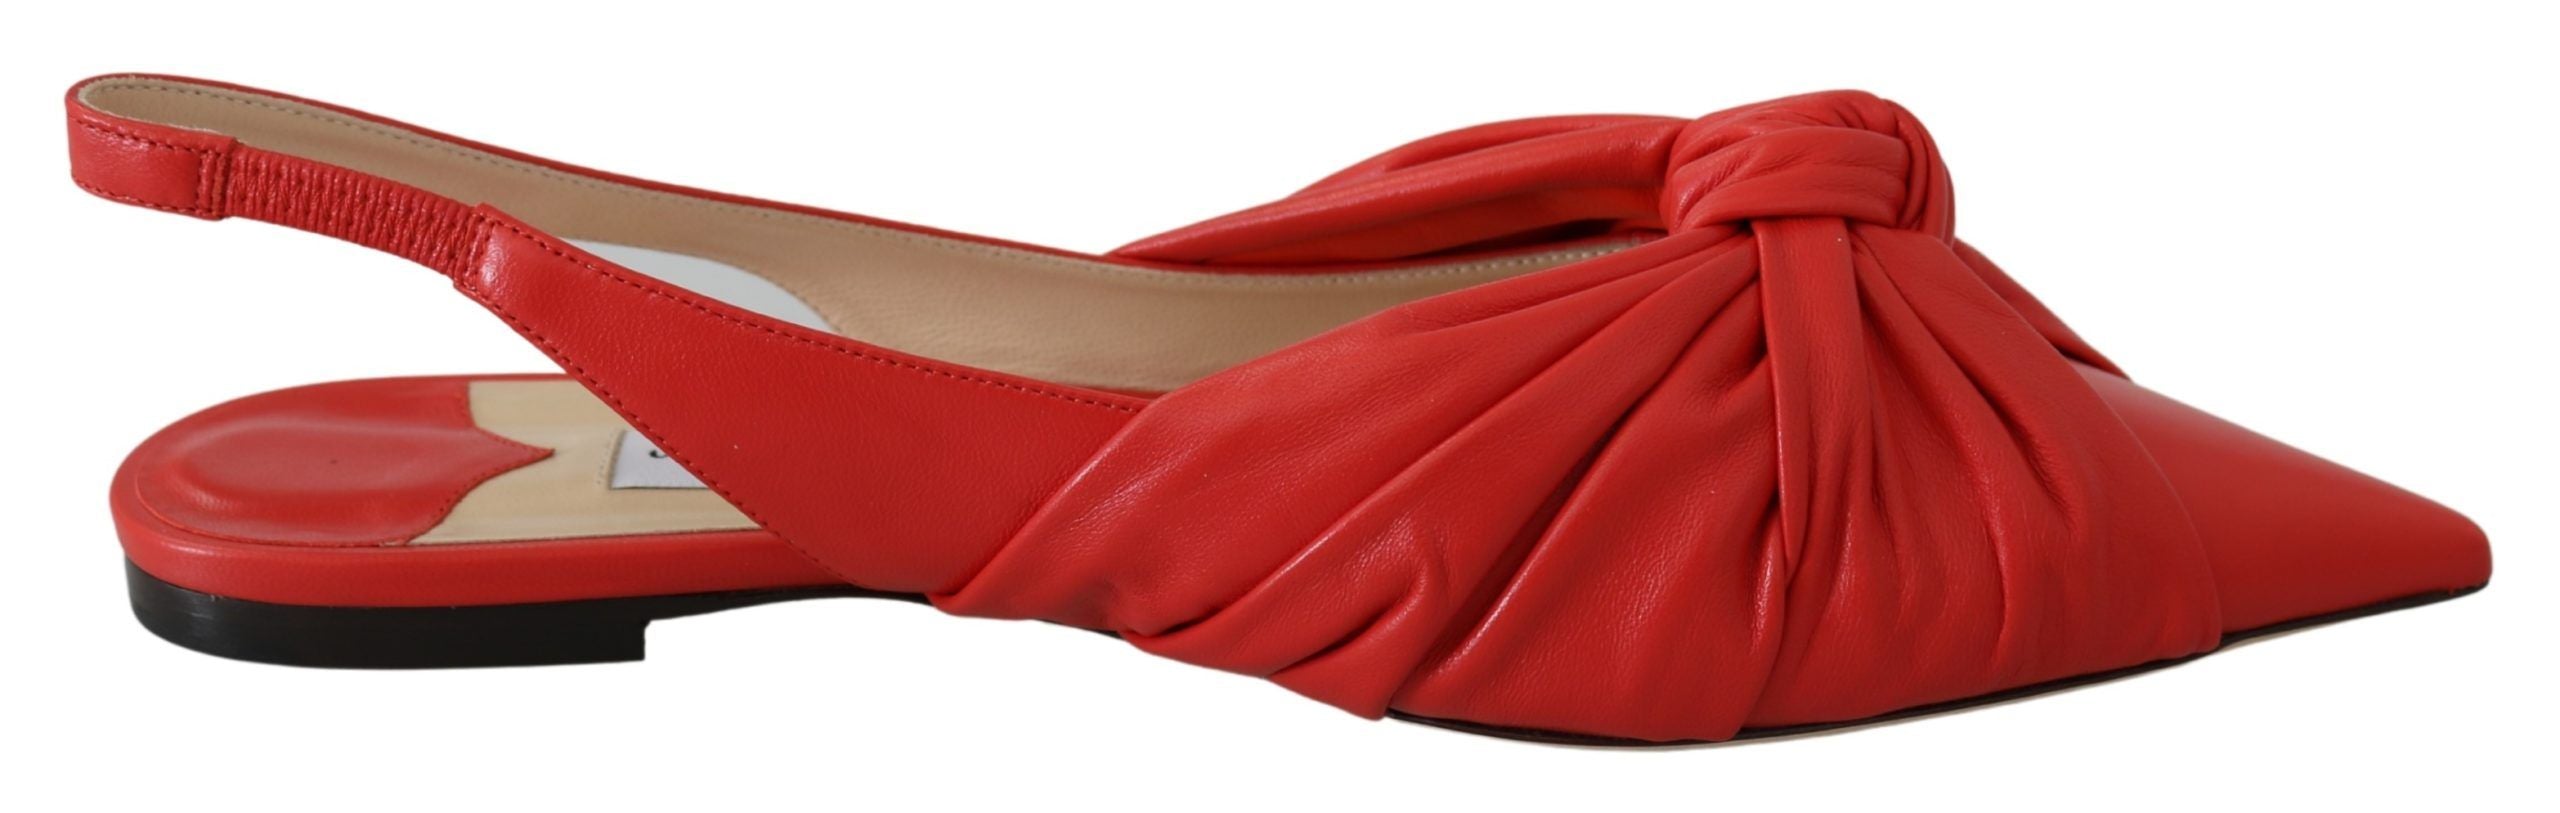 Chic Red Pointed Toe Leather Flats - Divitiae Glamour